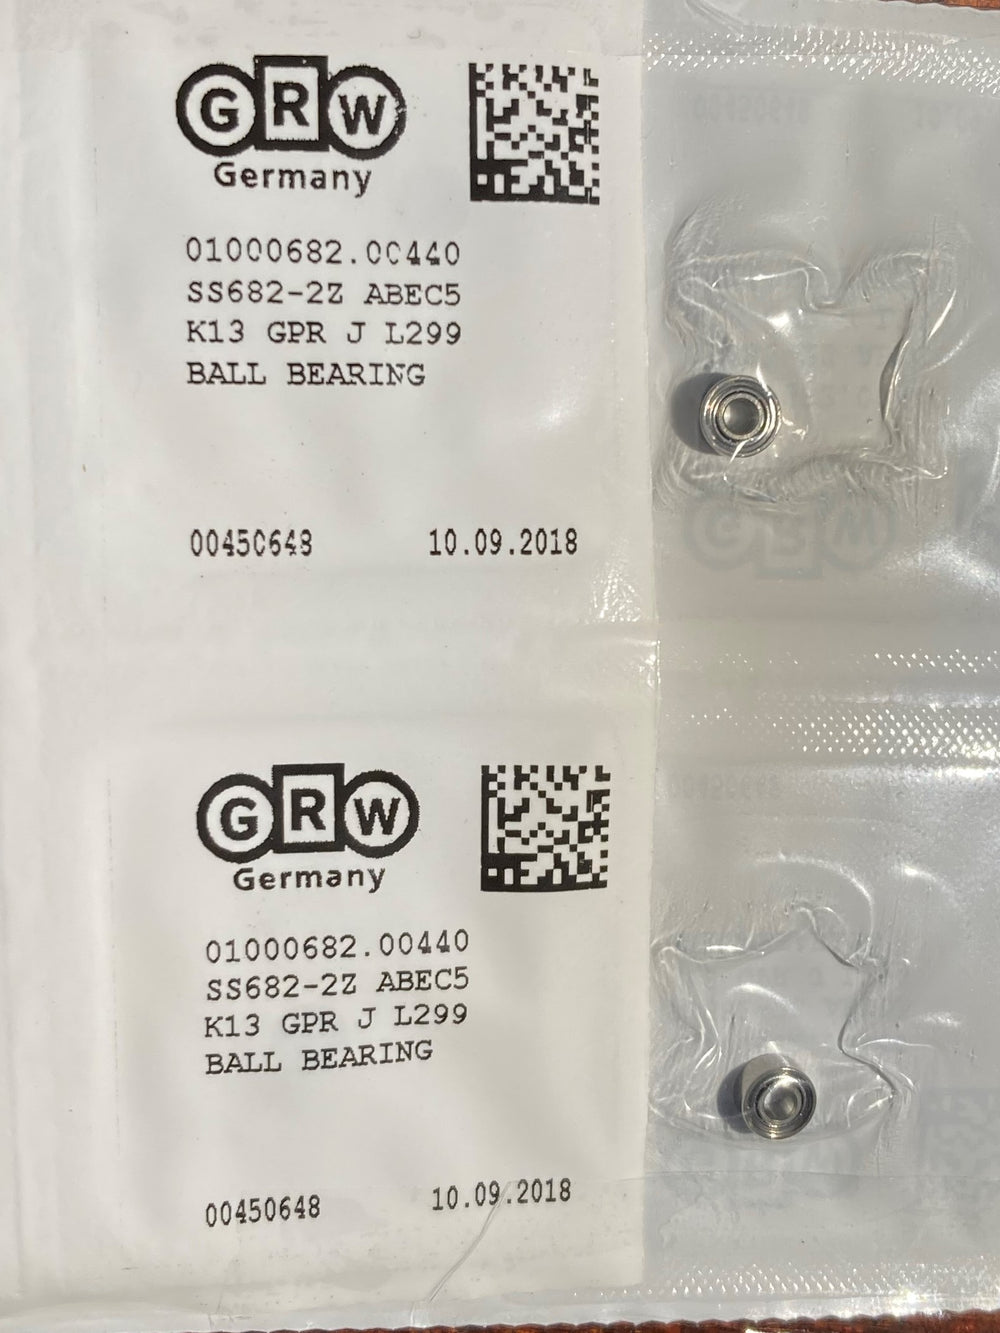 GRW SS682  2Z 2MM X 5MM Ultra High Precision Motor Ball Bearing SHIELDED & UNFLANGED - One each